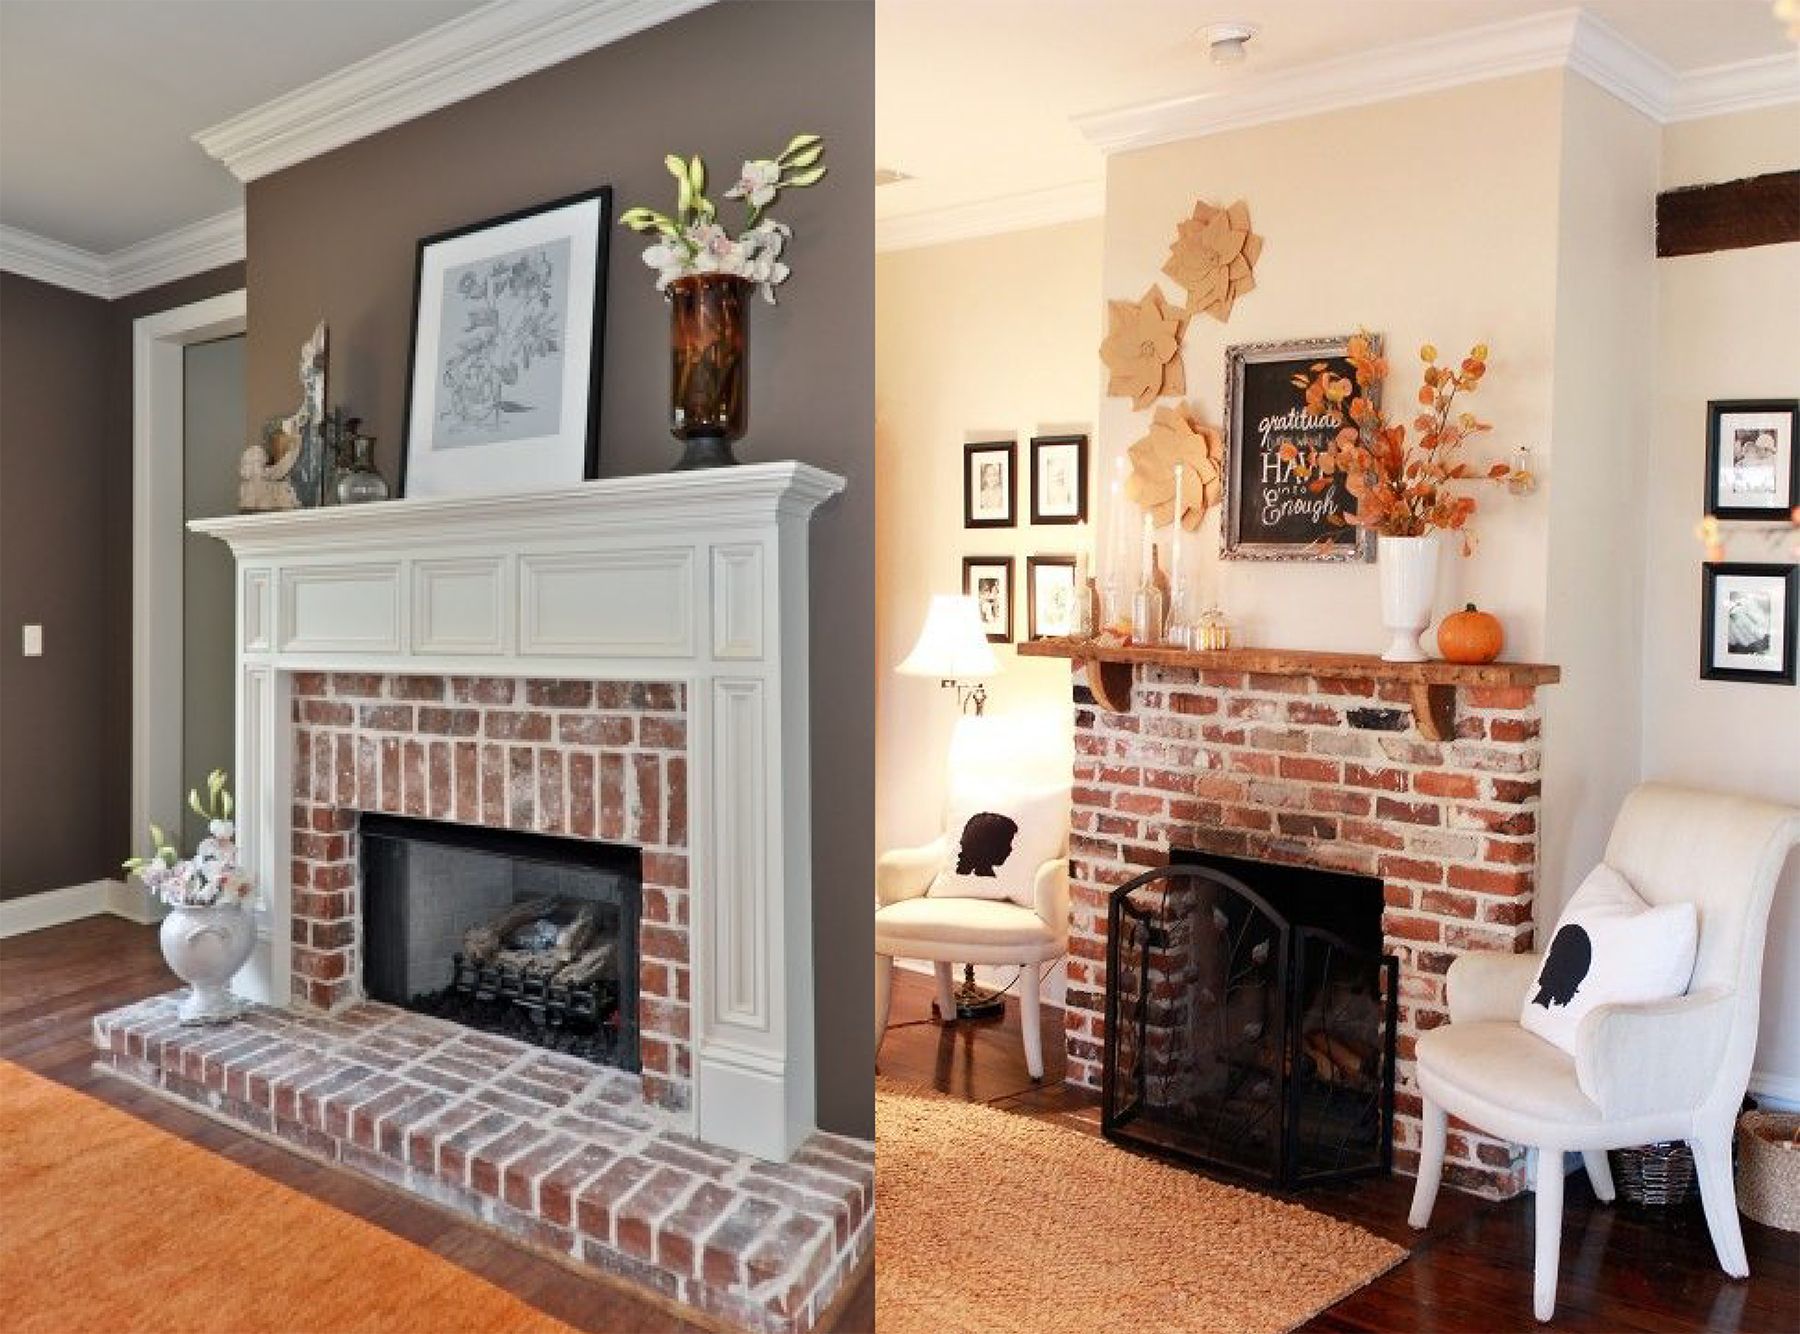 Refacing Brick Fireplace New Exposed Brick Fireplace Almond Home In 2019